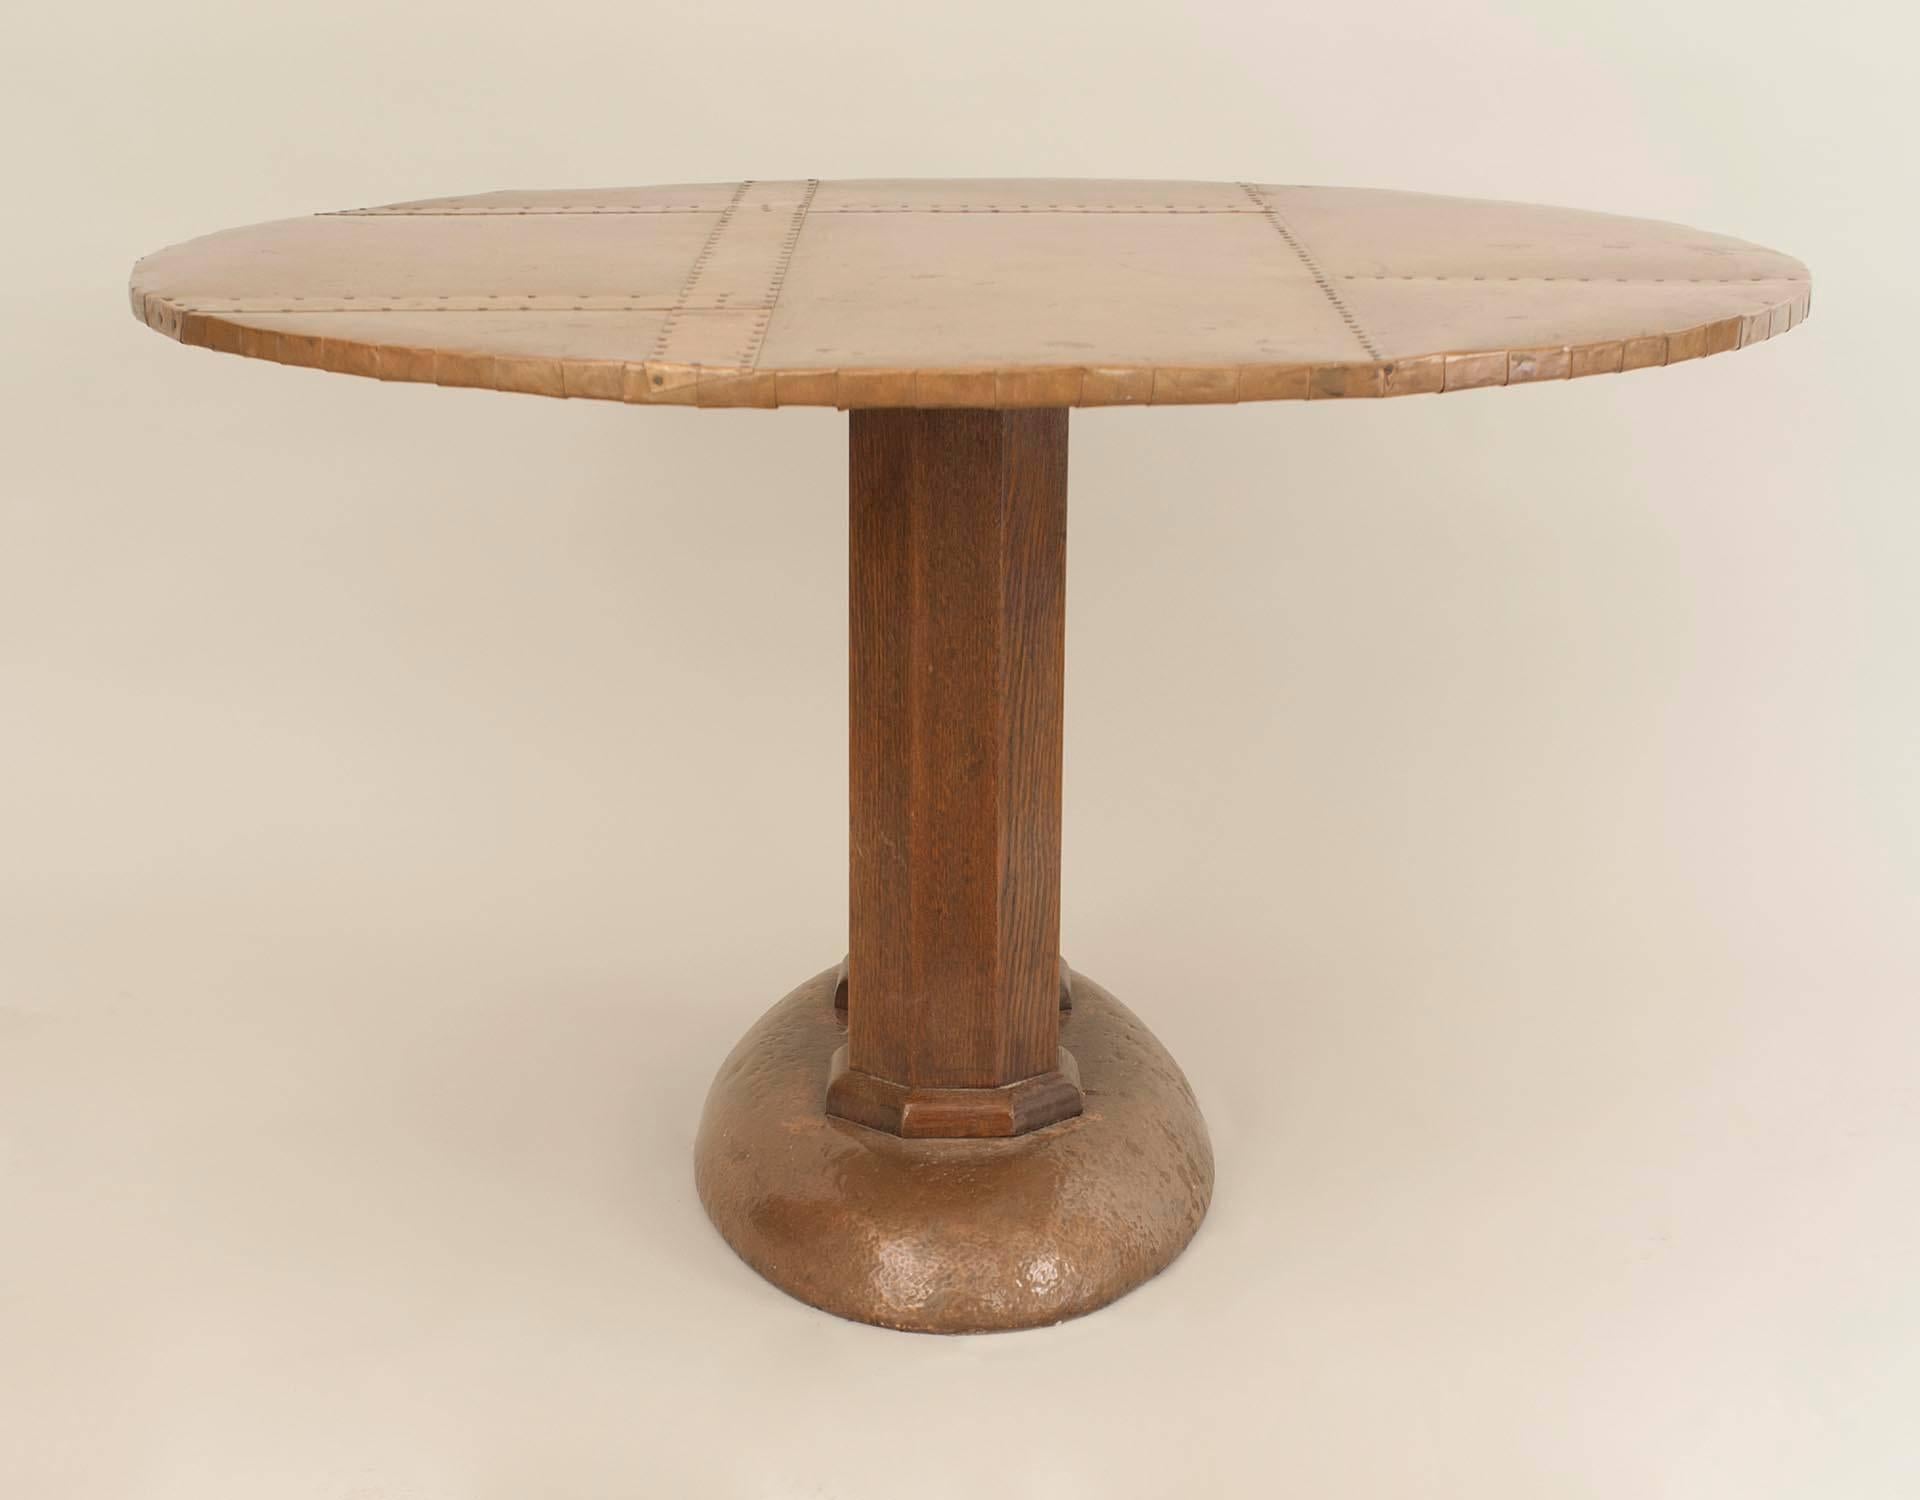 English Arts and Crafts center table with a round copper sheathed top supported by a pair of oak column pedestals over an oval copper sheathed base.